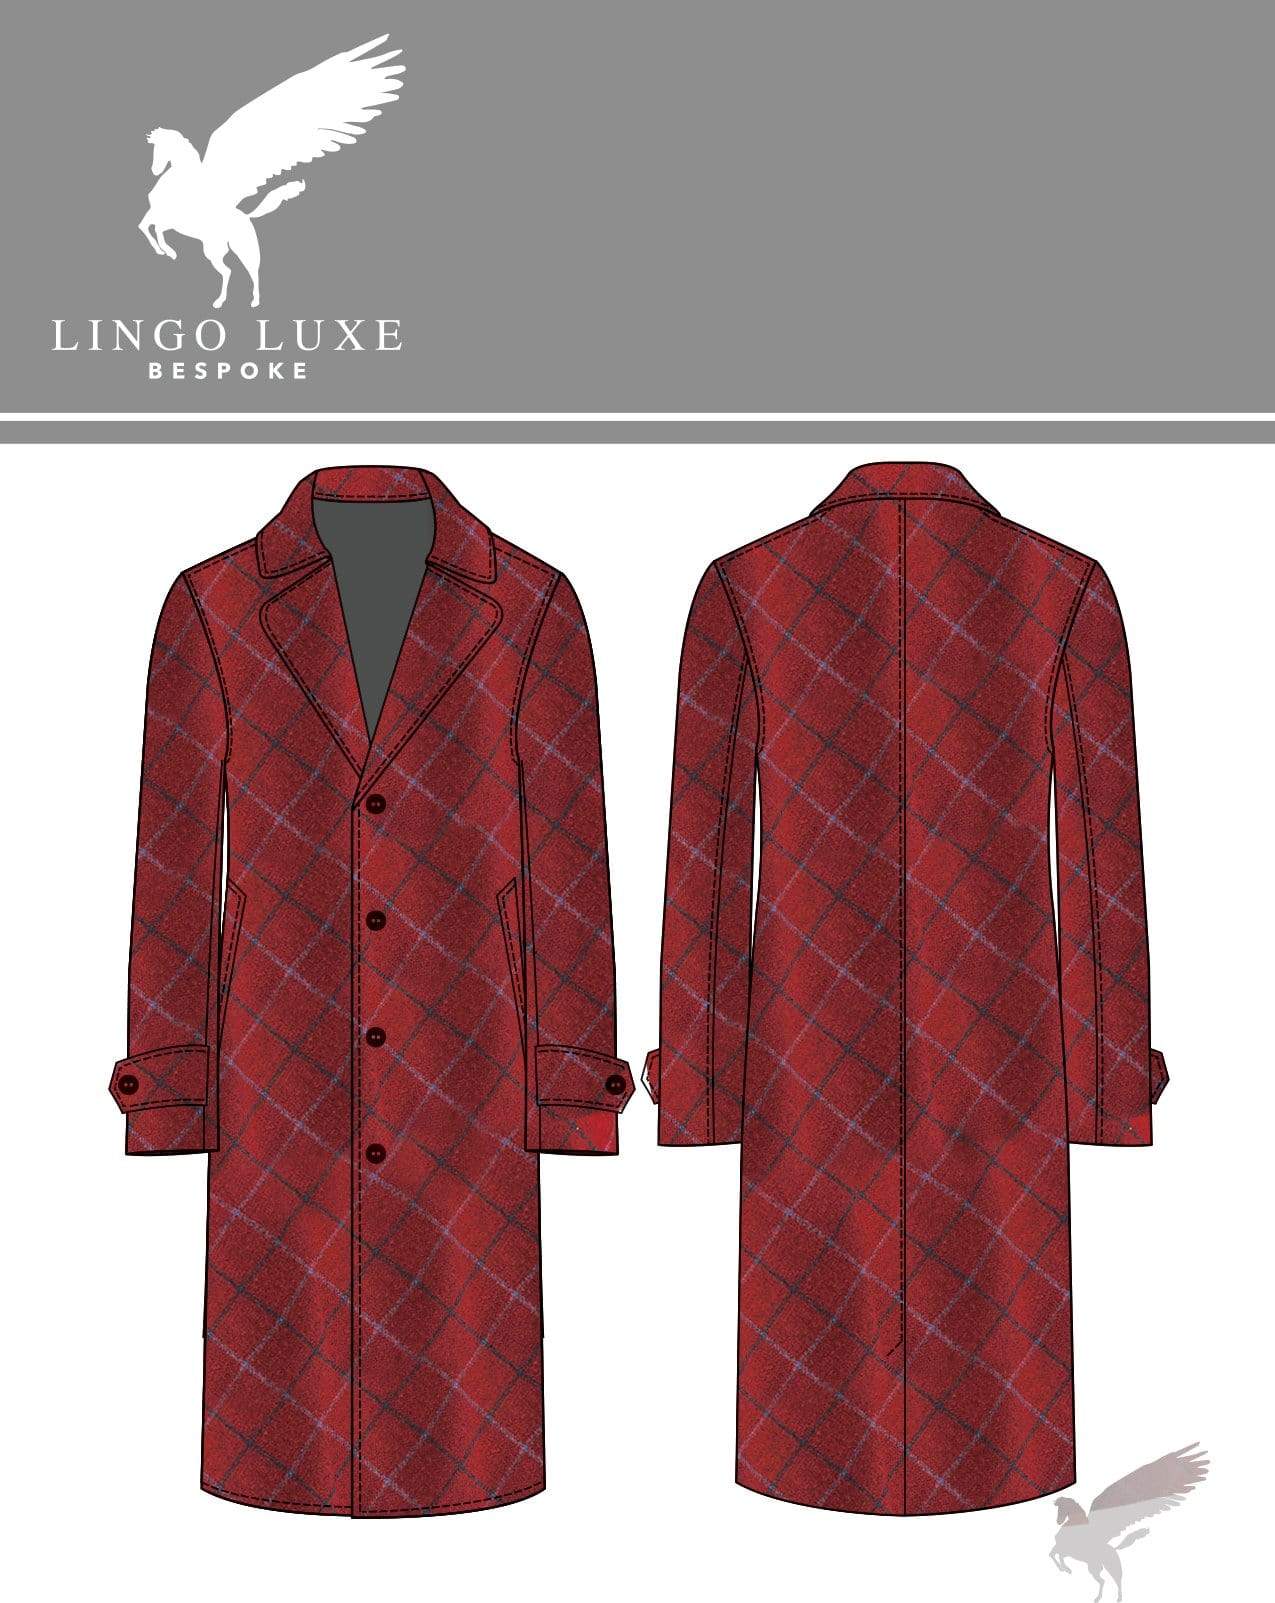 Outerwear | Lingo Luxe The Stately Overcoat | Ruby Tuesday-Lingo Luxe Bespoke